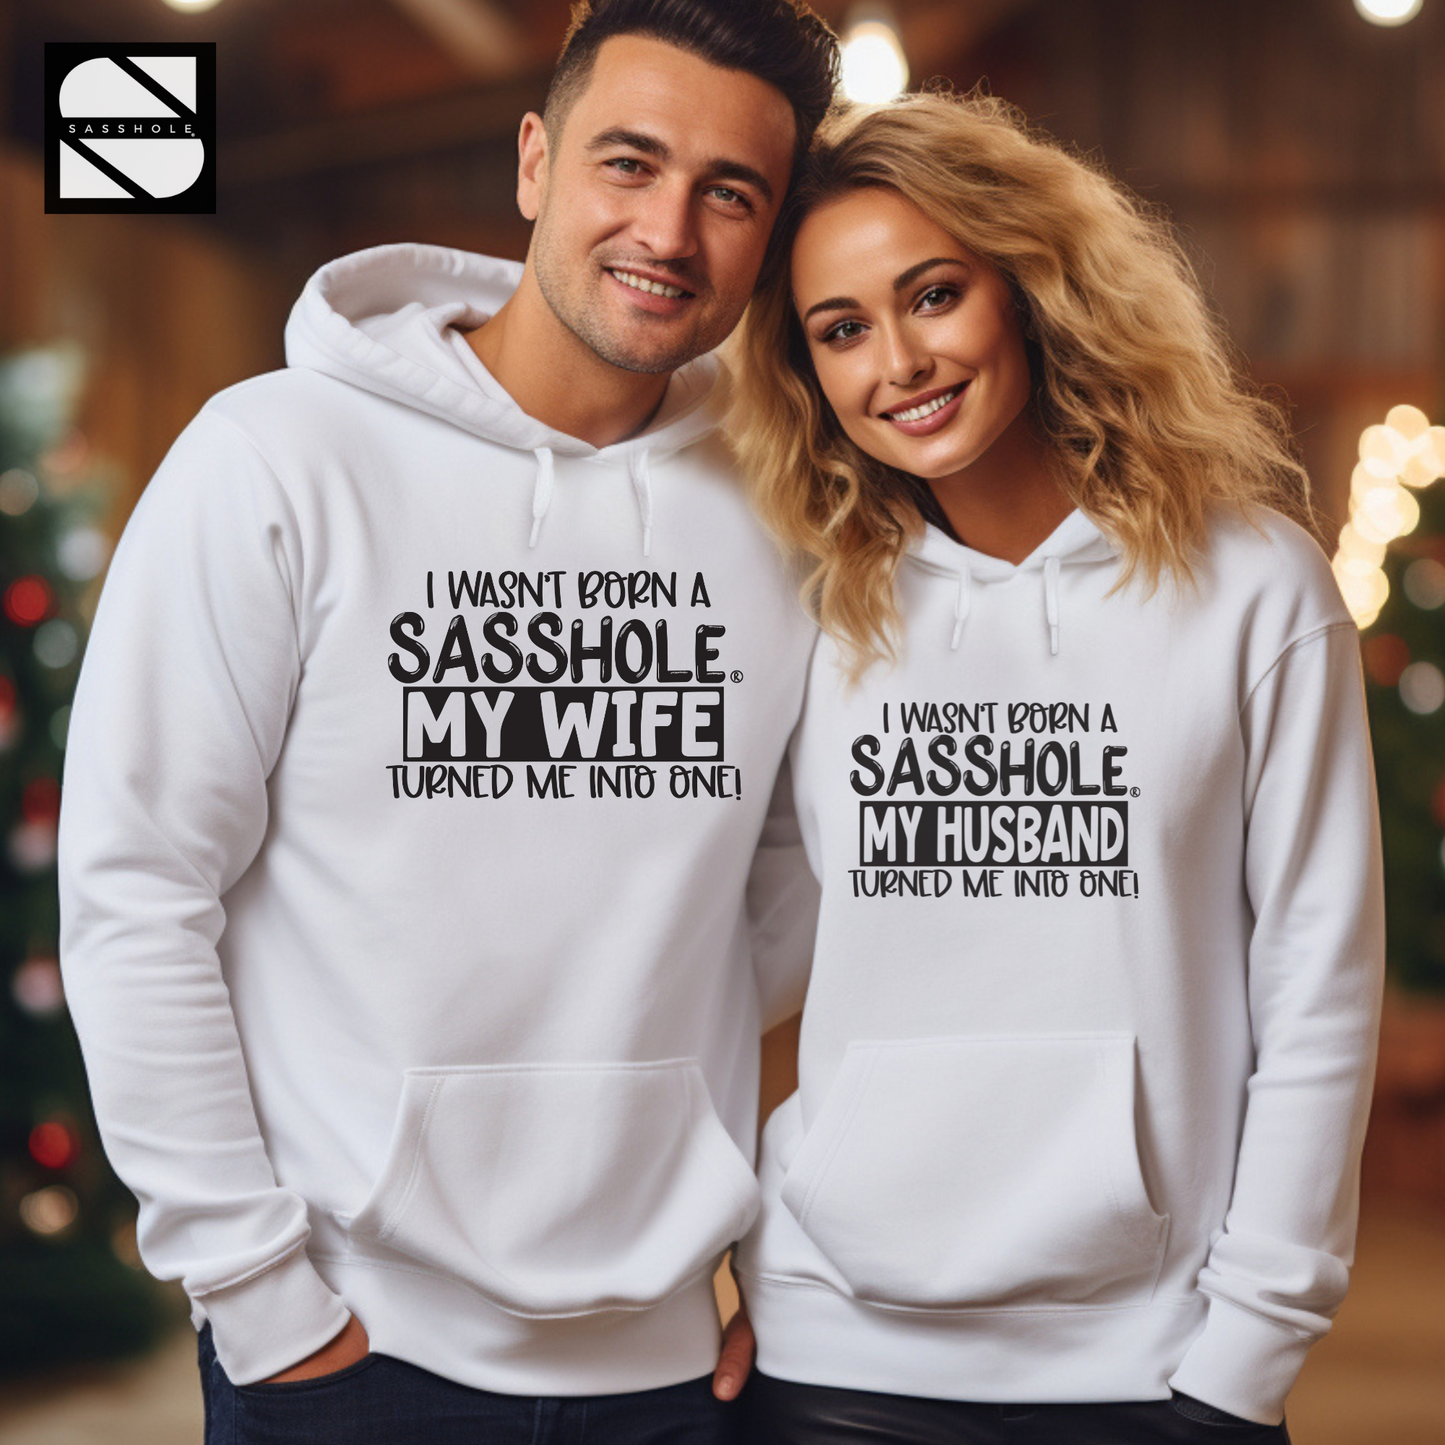 Witty Clothing, white hoodies, white hoodie sweatshirt, white hoodie, white graphic hoodie, Whimsical Hooded Sweatshirt, Unisex, Unique Men's Fashion, unique hoodies, Trendy Joke Wear, trendy hoodies, trendy graphic hoodies, sweatshirts hoodies, Statement Pullover, Standout Hoodie, Stand-up Comedy Style, Spousal Sassiness, Sassy Spouse Fashion, Sassy Husband Hoodie, sasshole hoodie